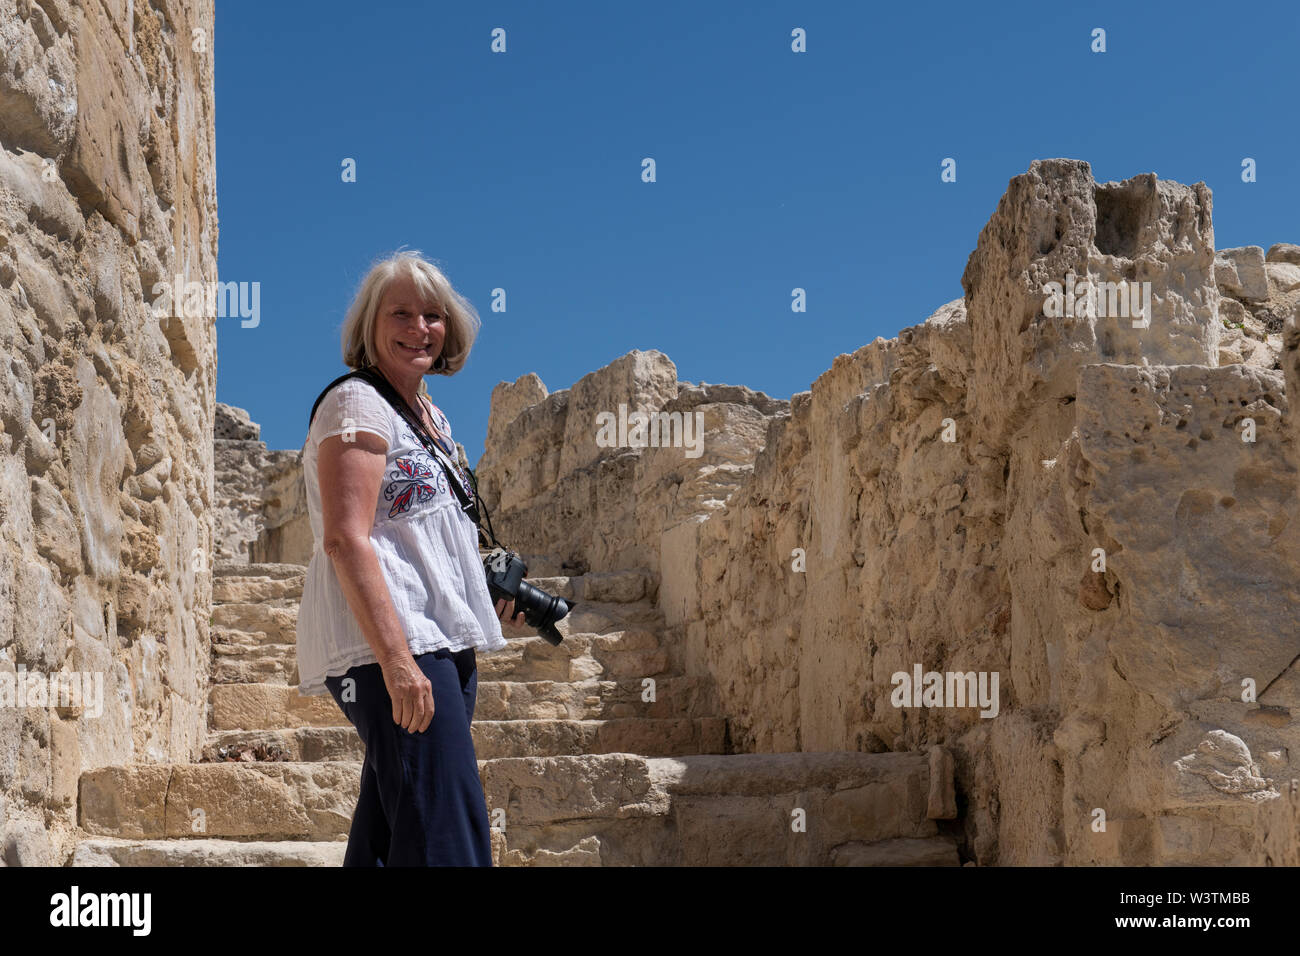 Cyprus, ancient archaeological site of Kourion. Female tourist, model released. Stock Photo